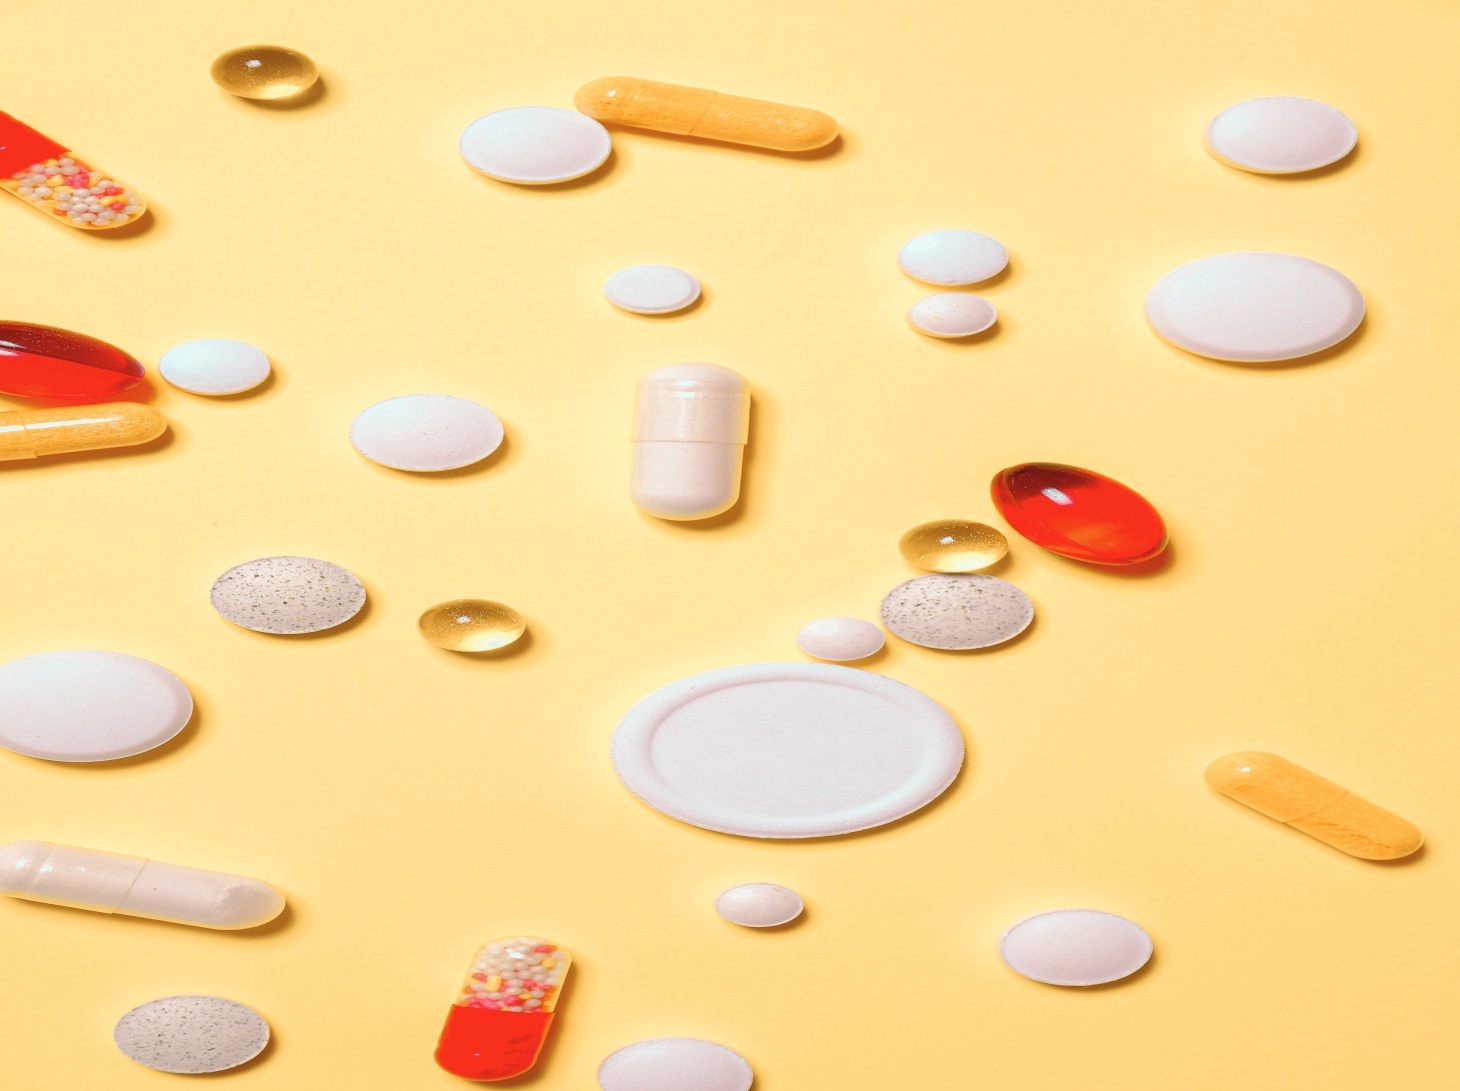 Red and white birth control pills scattered on a yellow surface.